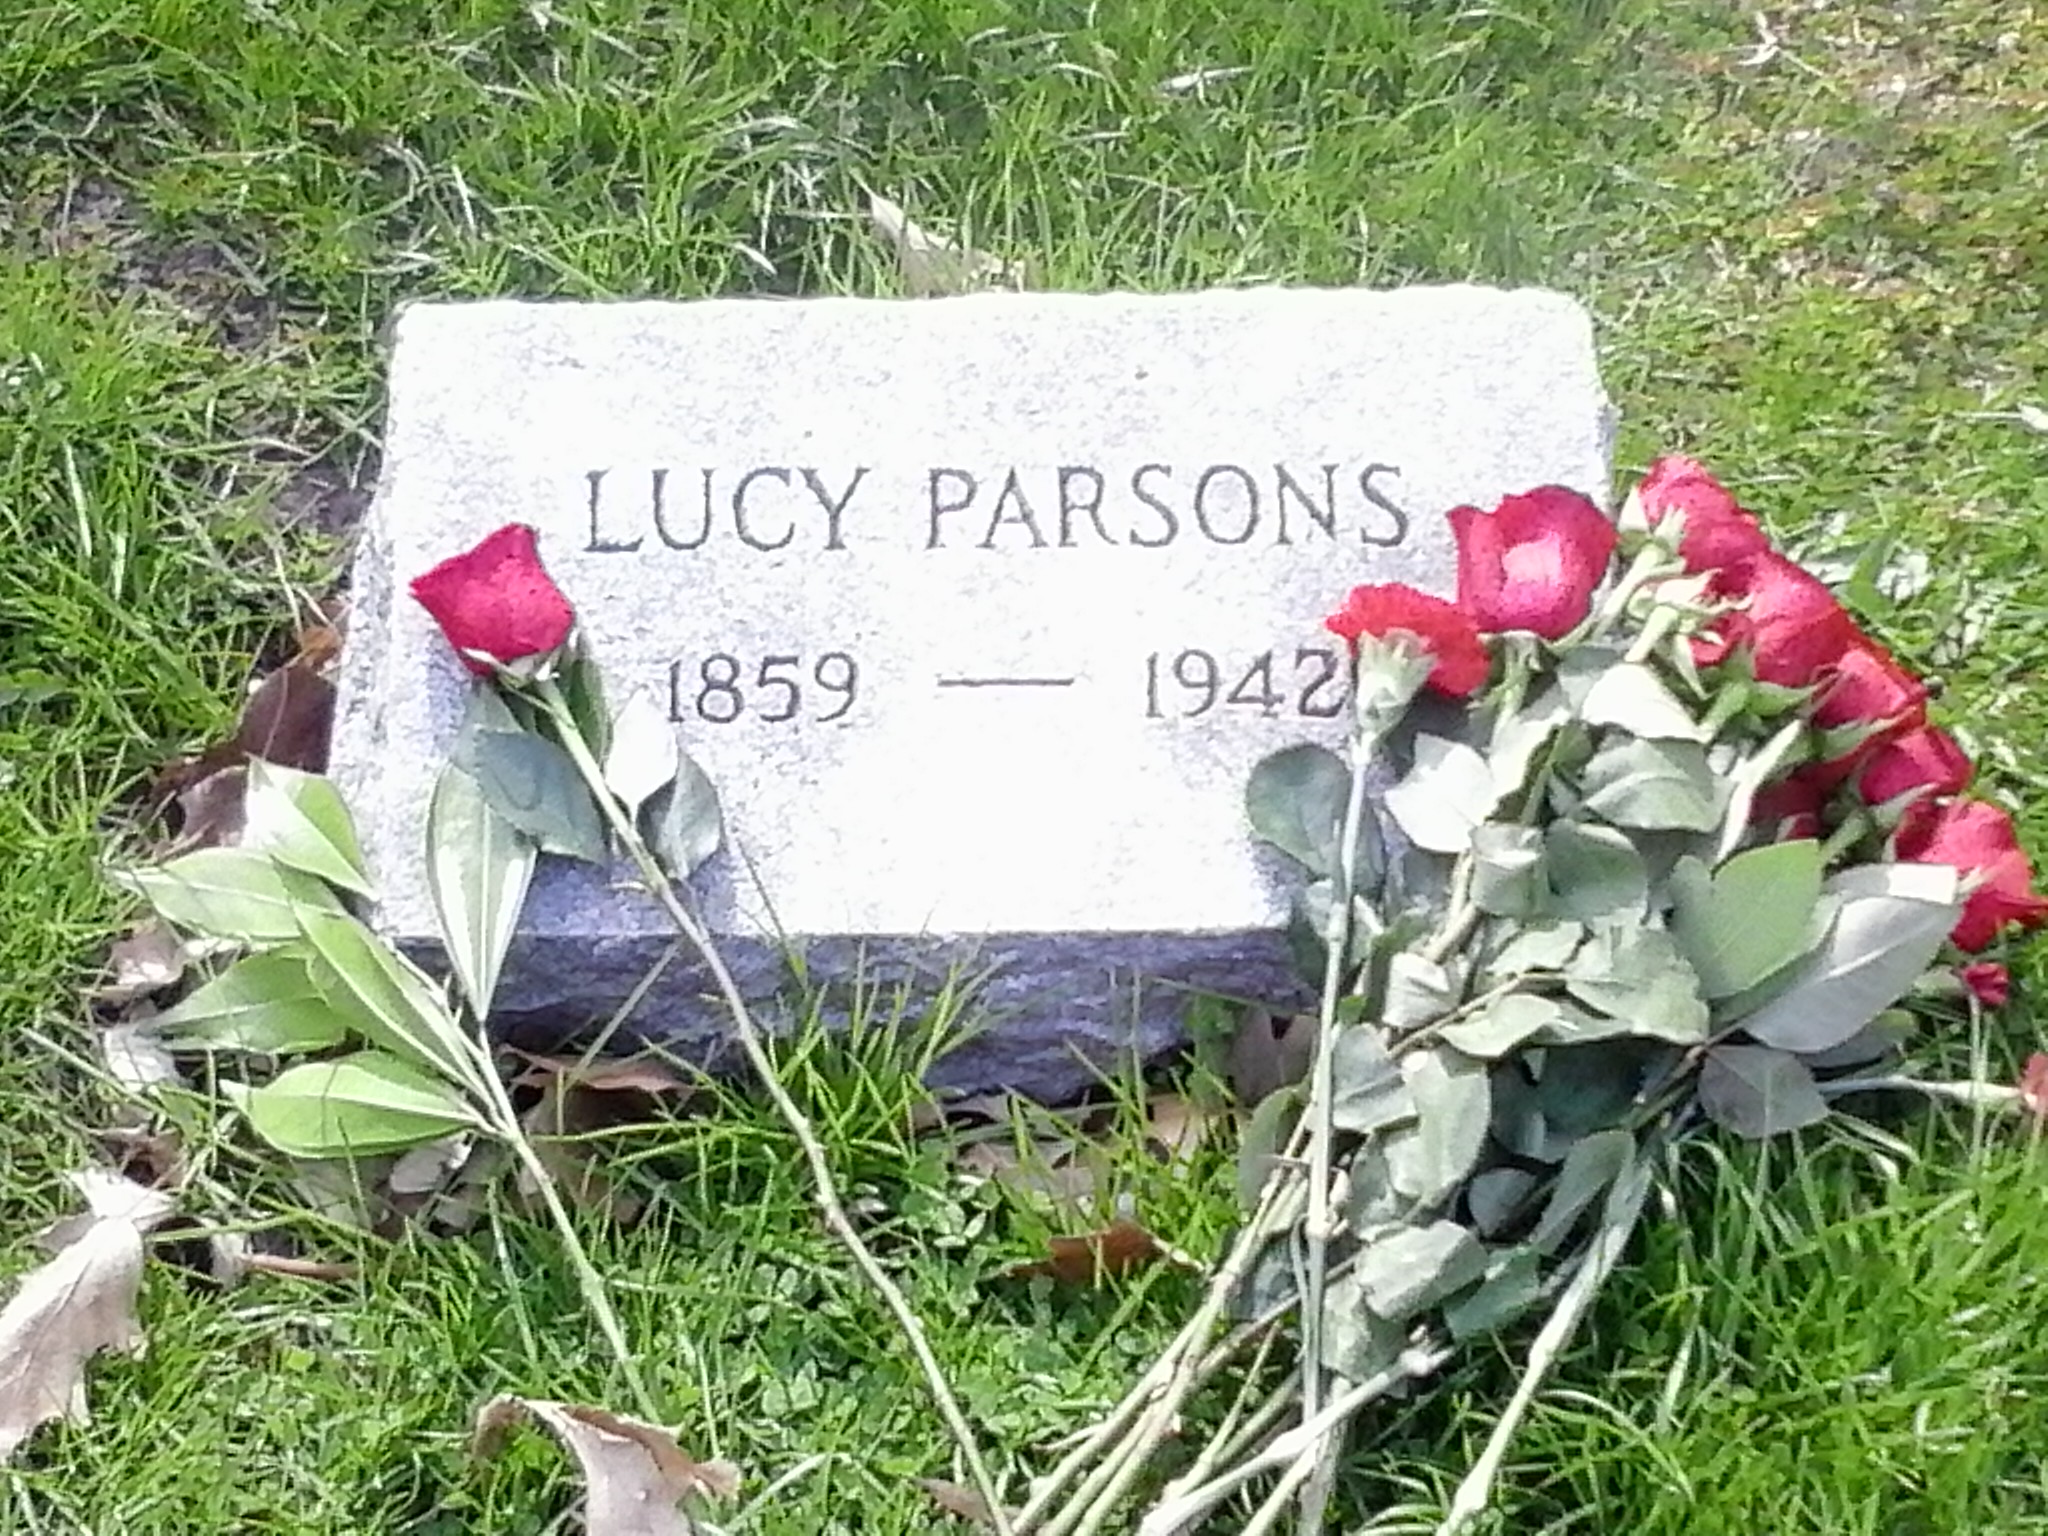 Lucy Parsons tomb stone